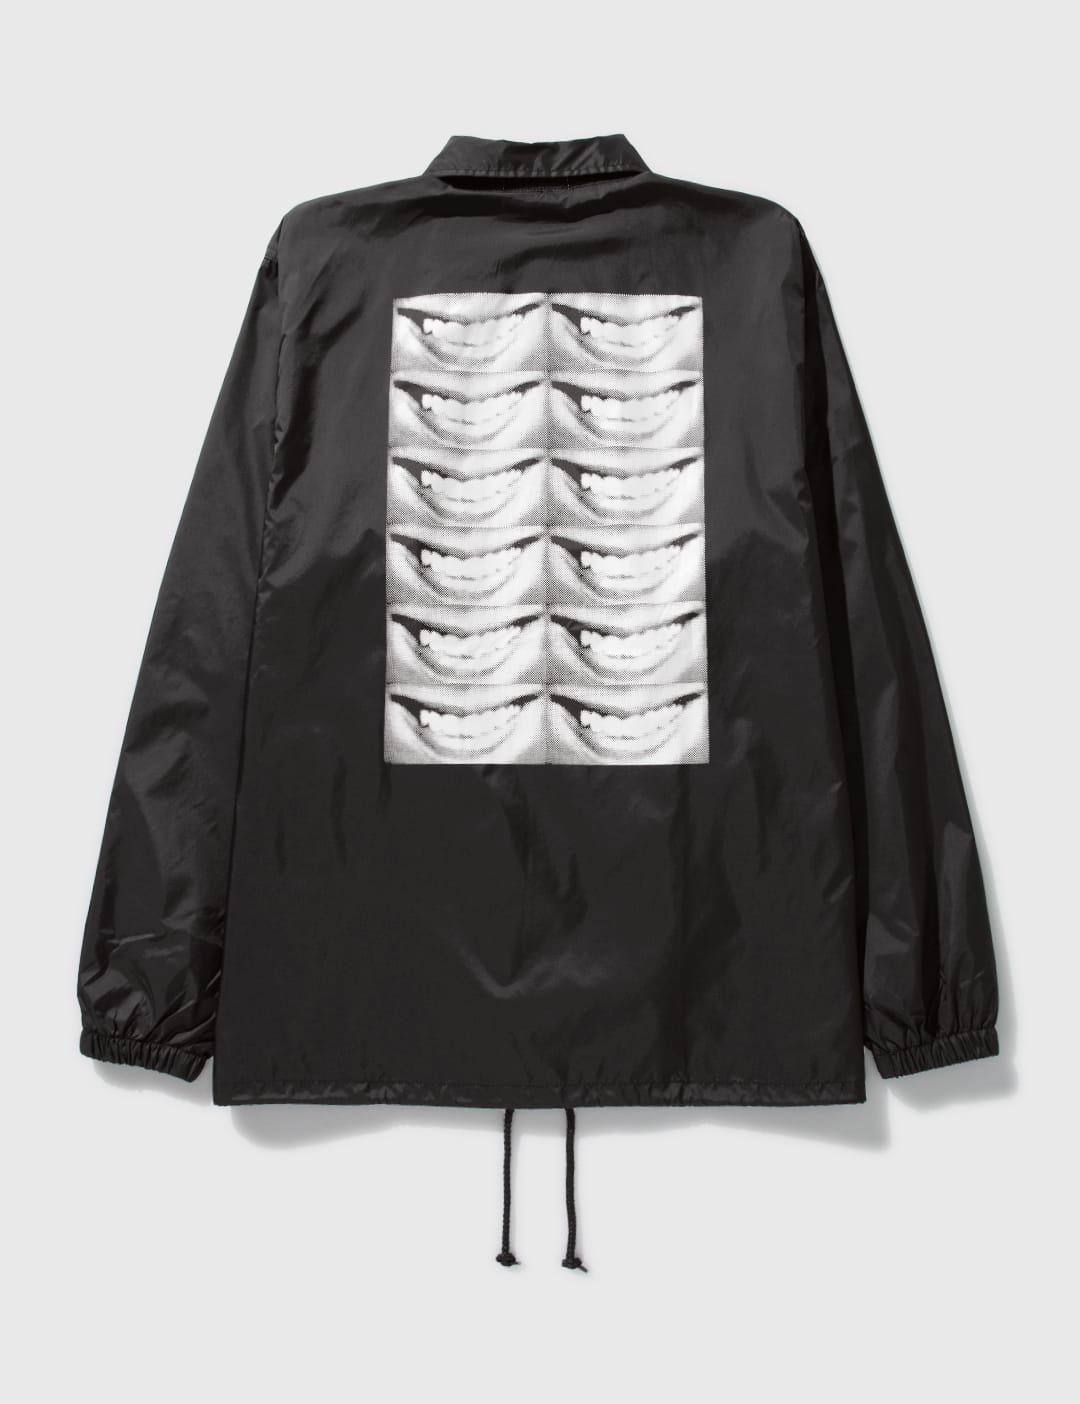 Flagstuff - Lips Coach Jacket | HBX - Globally Curated Fashion and